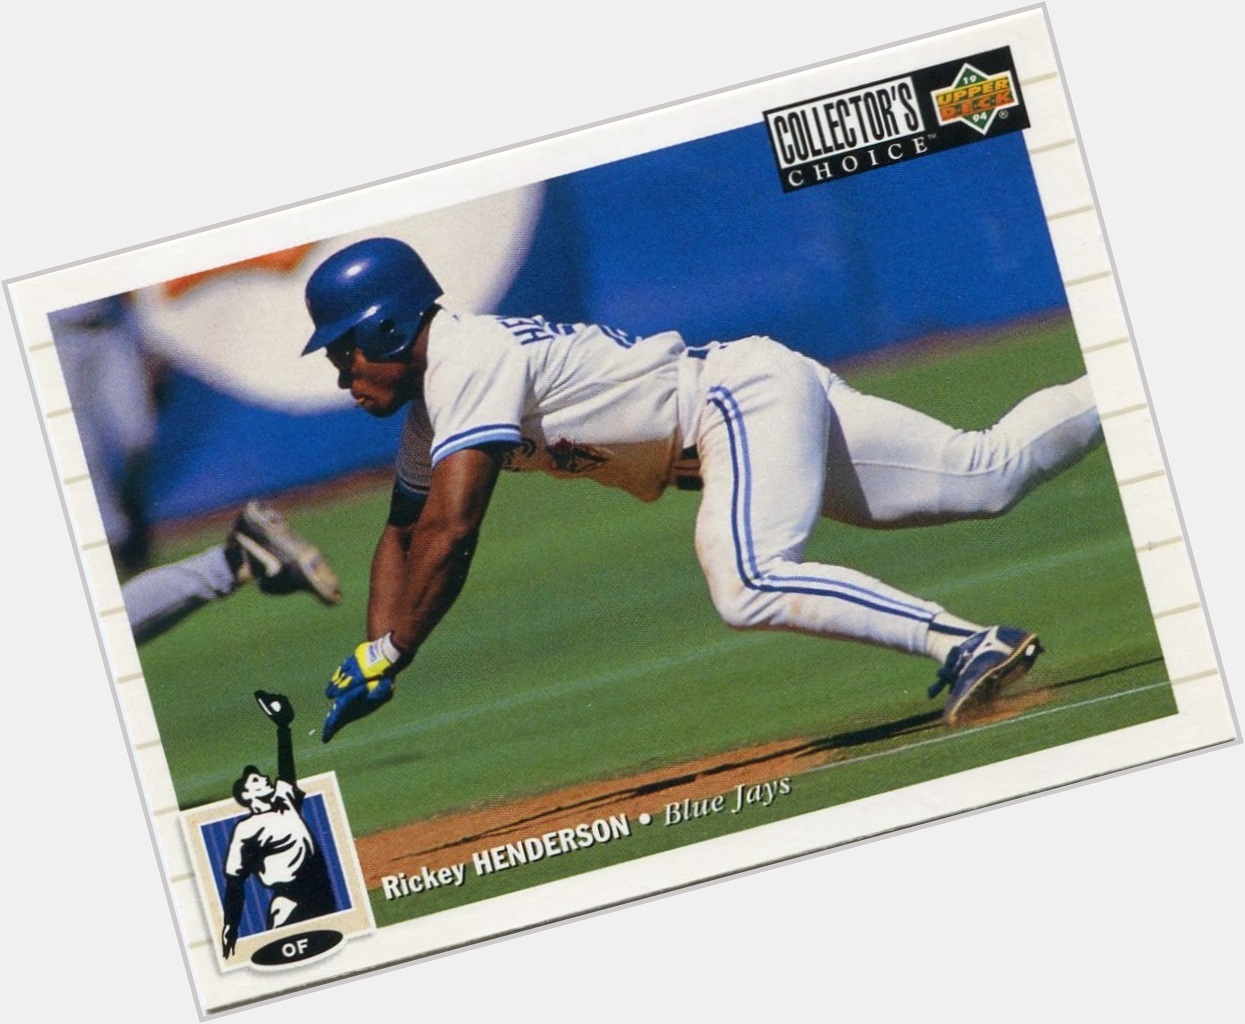 Happy 59th Birthday to Hall of Famer and former Toronto Blue Jays outfielder Rickey Henderson! 